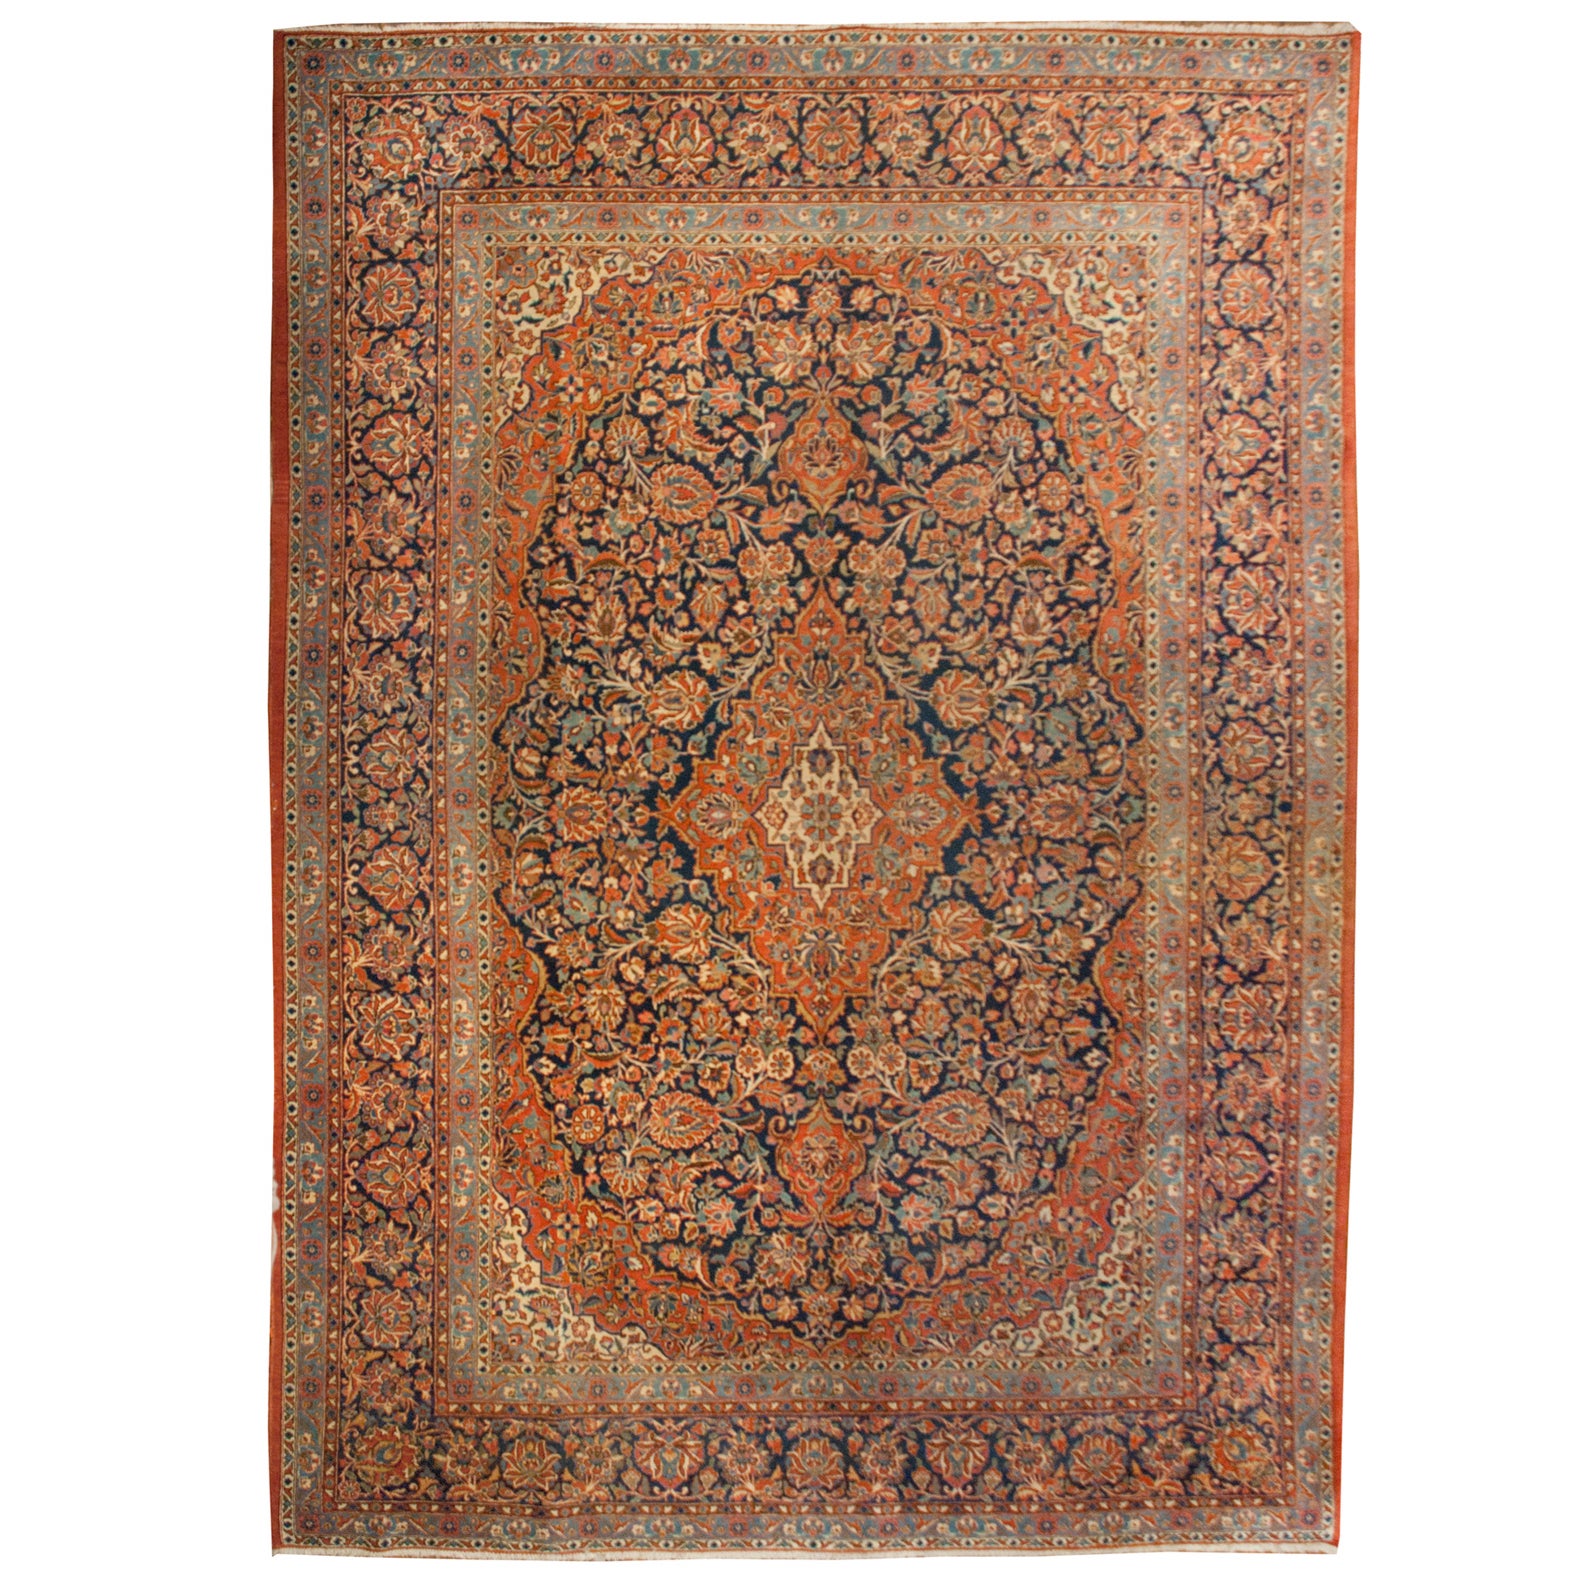 Early 20th Century Persian Kashan Rug For Sale at 1stDibs